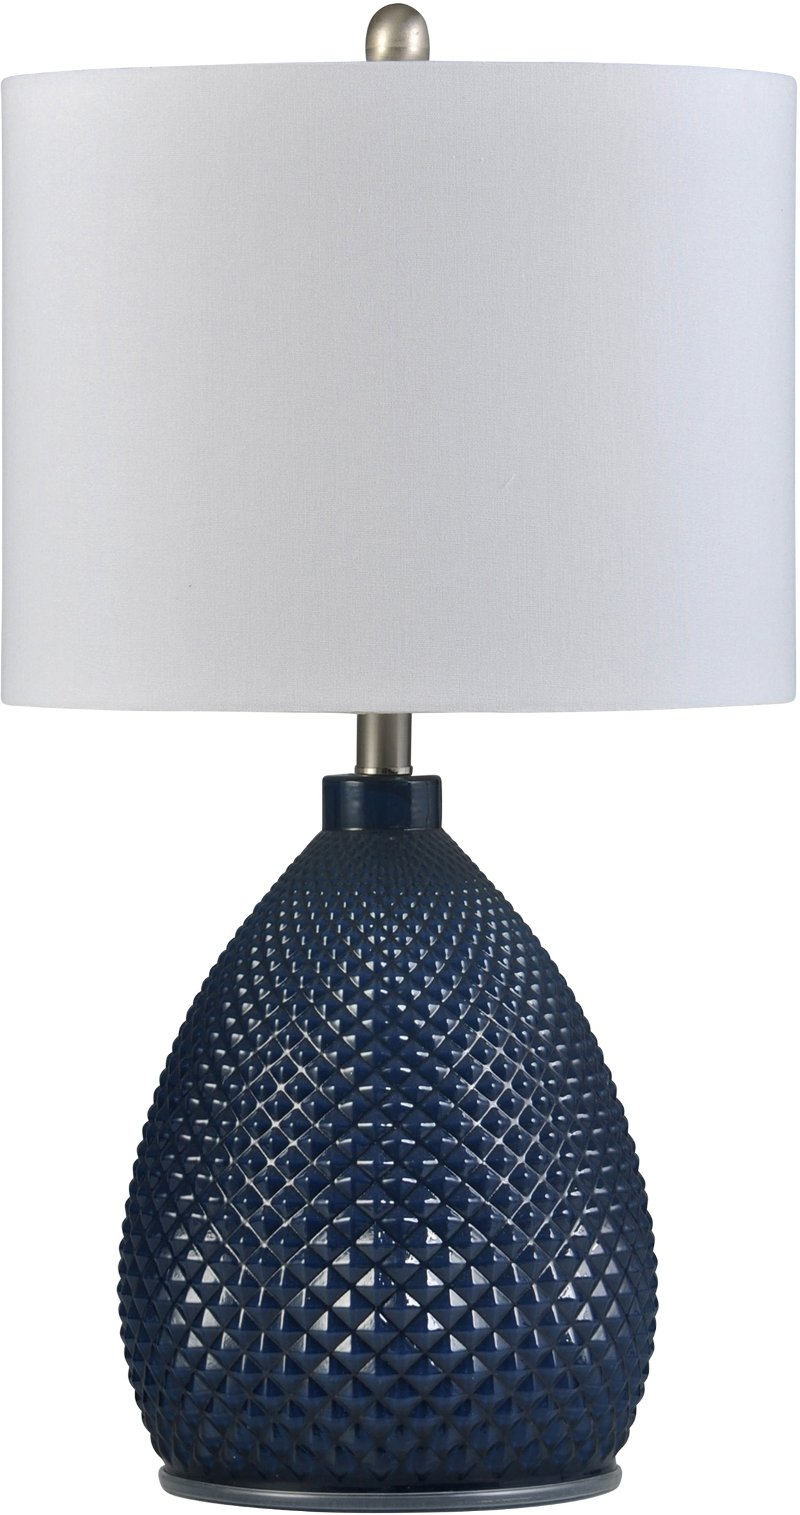 26 Inch Navy Blue Glass Table Lamp Rc, Indigo Blue Glass Table Lamp